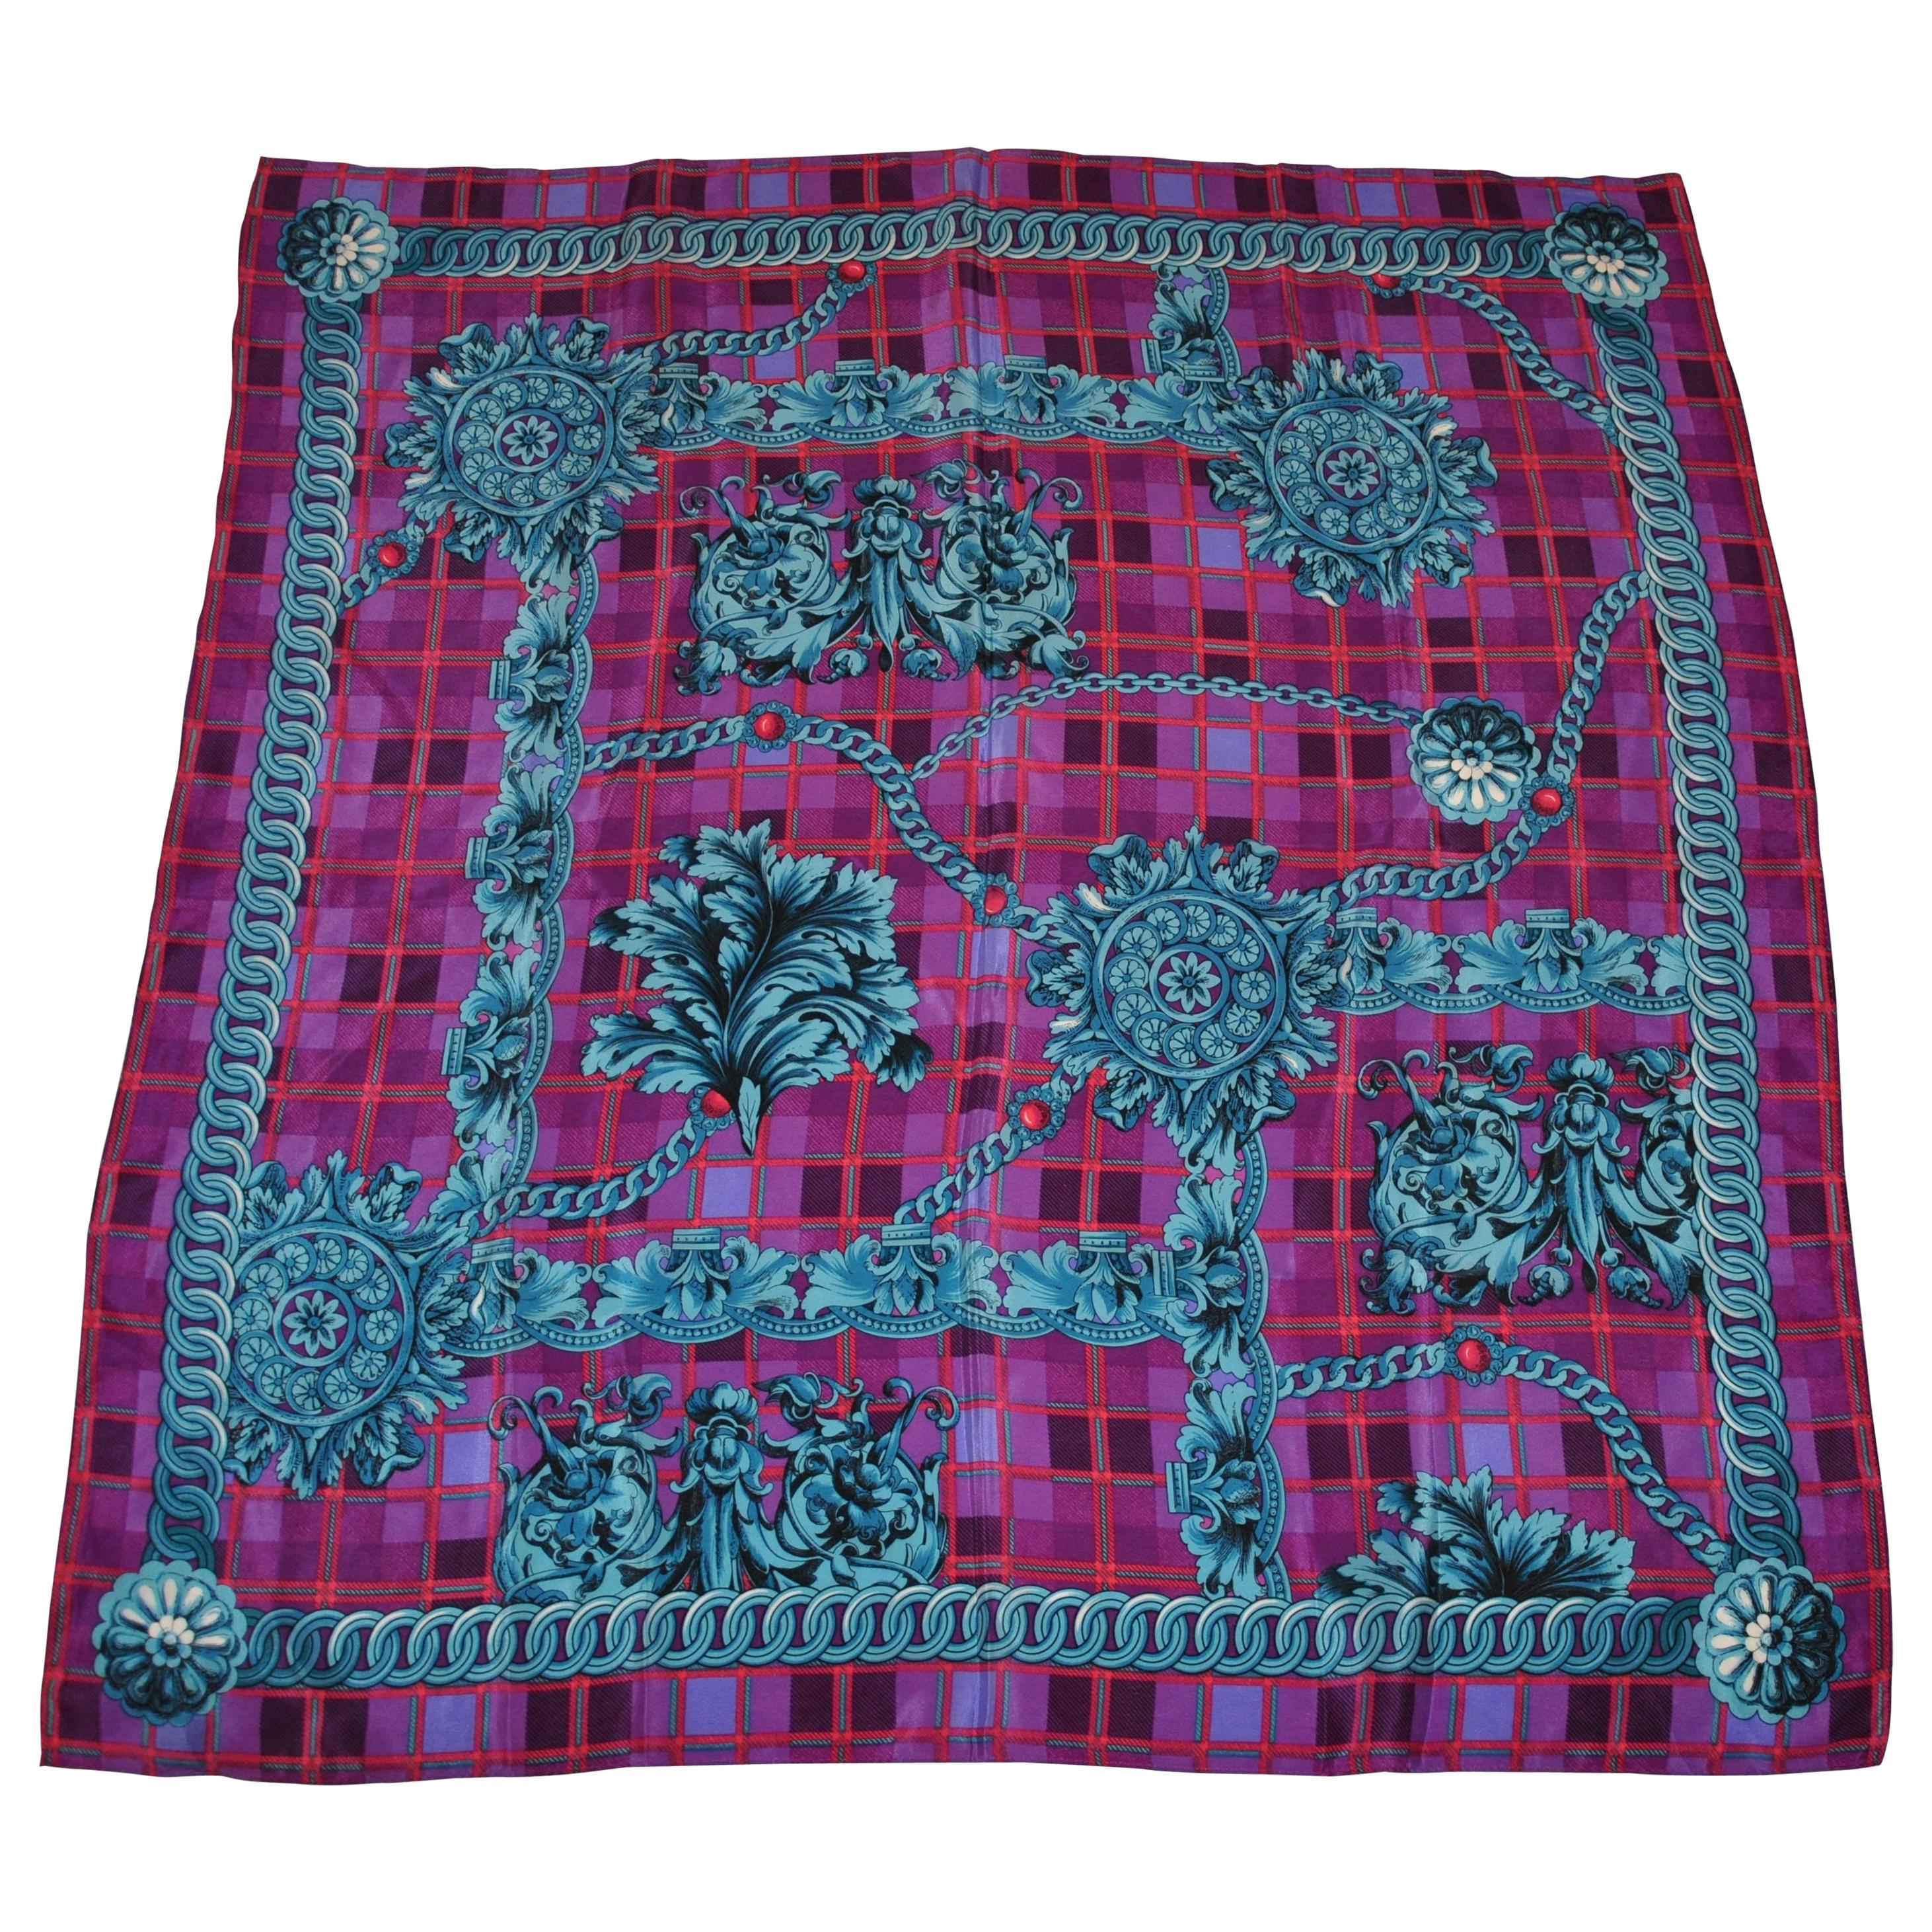 Majestic Shades of "Violet & Turquoise" Silk Scarf For Sale